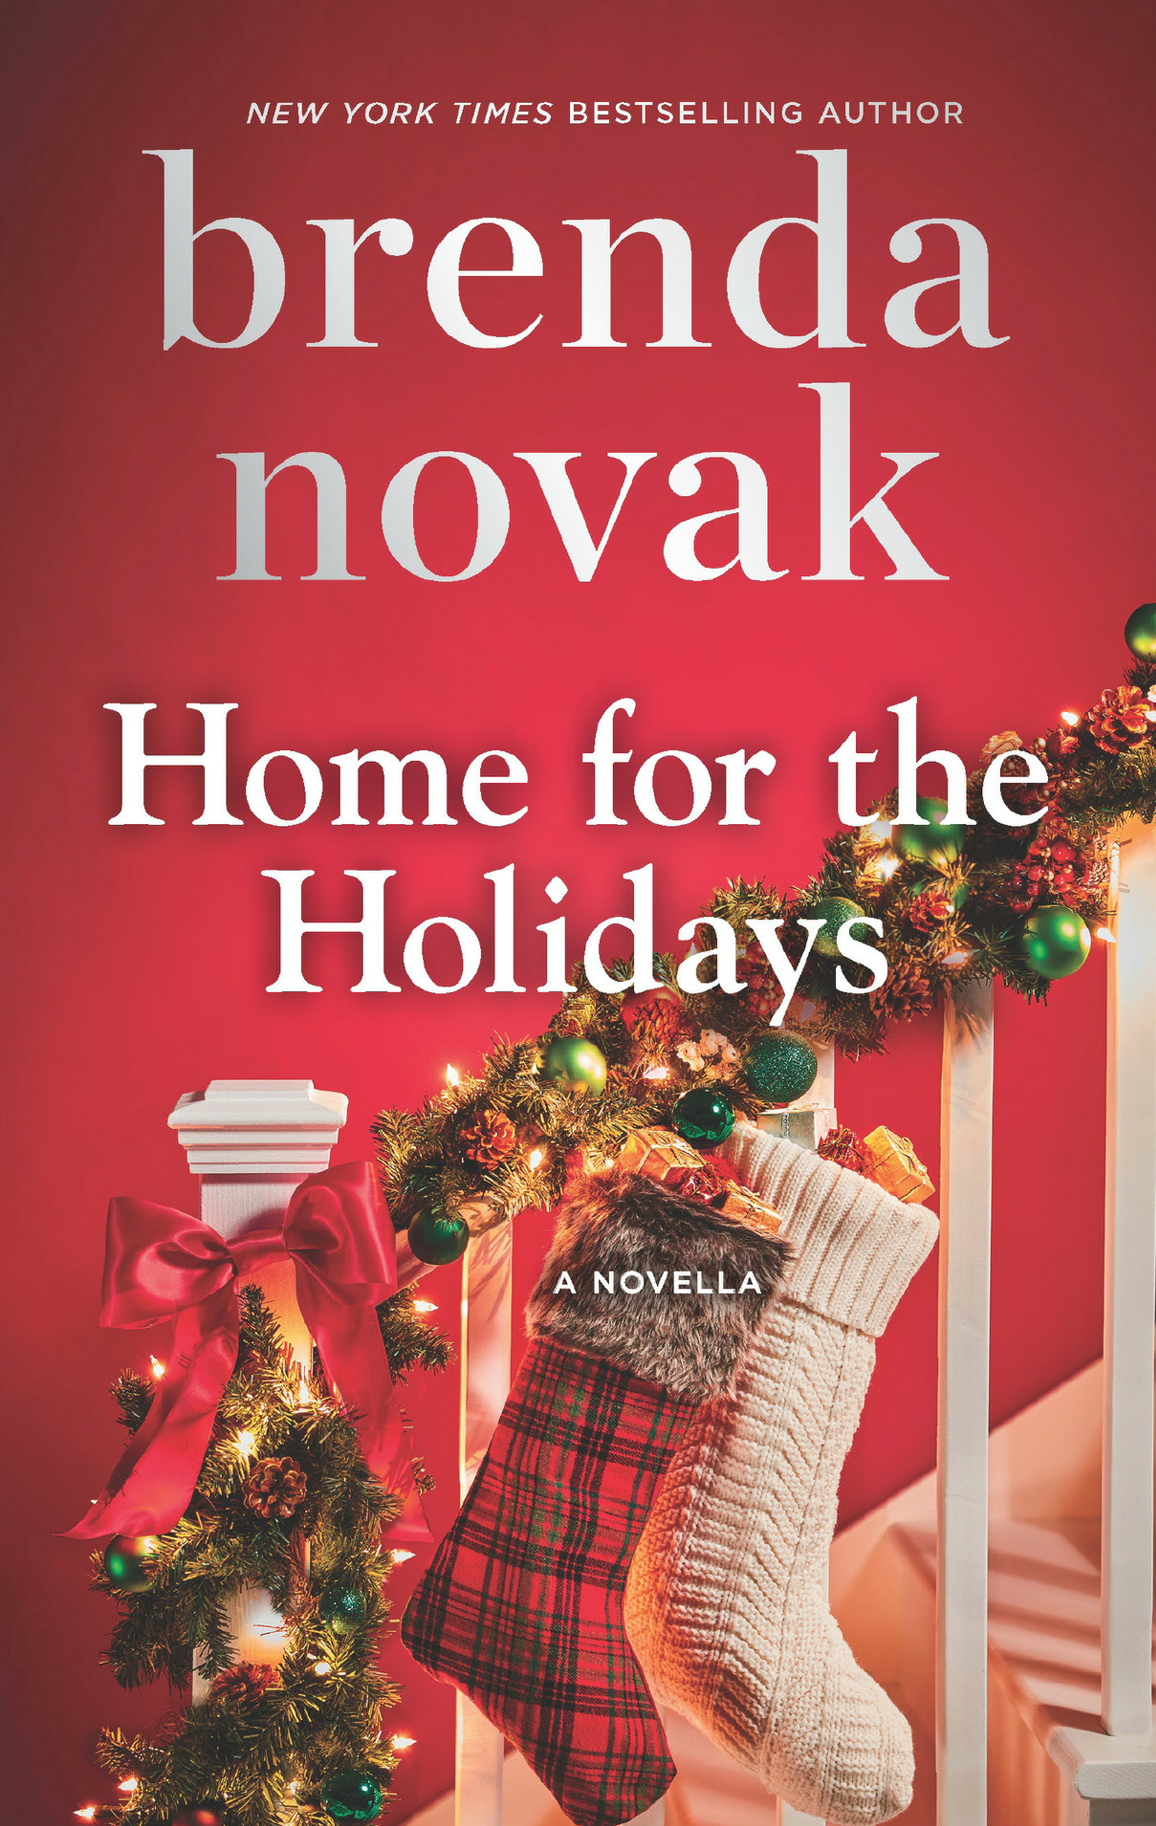 When the holidays come. Brenda Novak книги. Home for the Holidays.